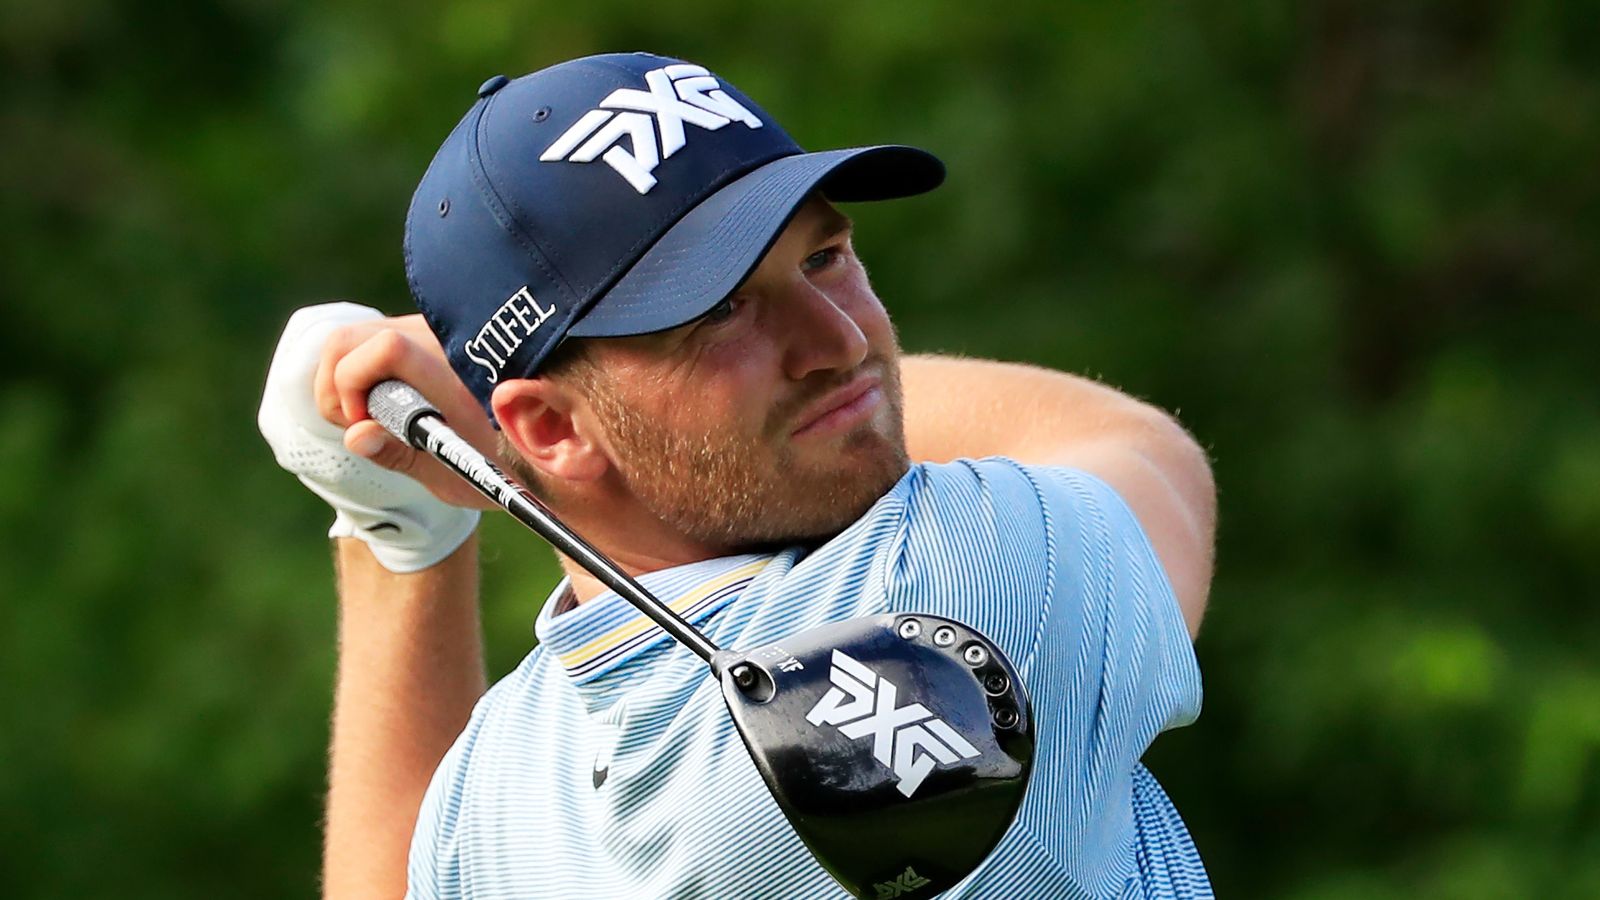 Wyndham Clark puts stars in the shade with 61 at Phoenix Open | Golf ...